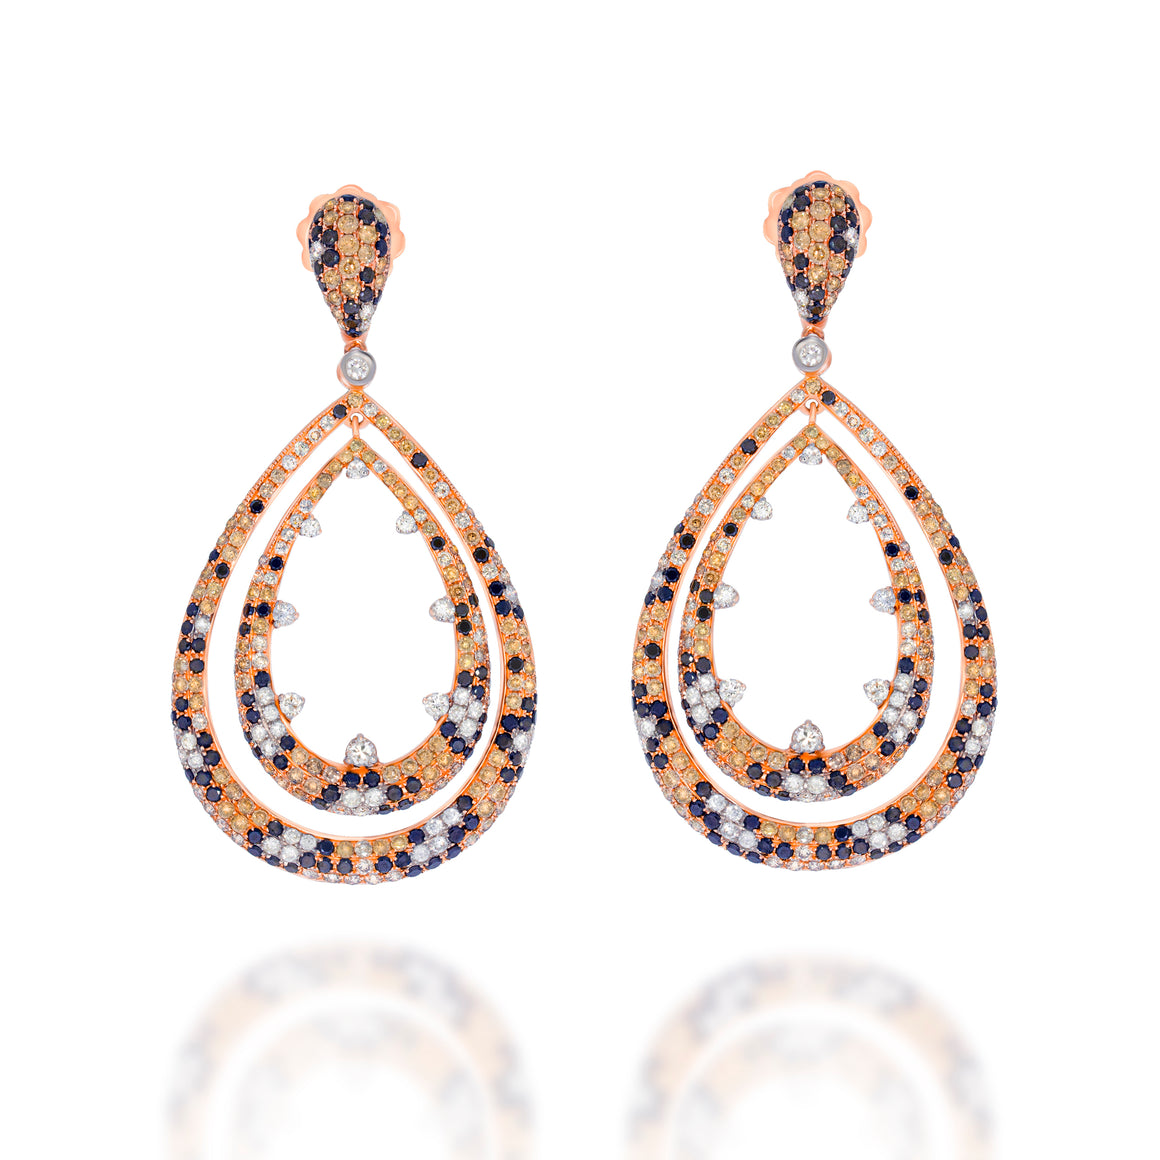 Double Pear Shaped Diamond Dangle Earrings in 18K Rose Gold set with multitude of shades: Champagne, Black, and white rounds Diamonds.